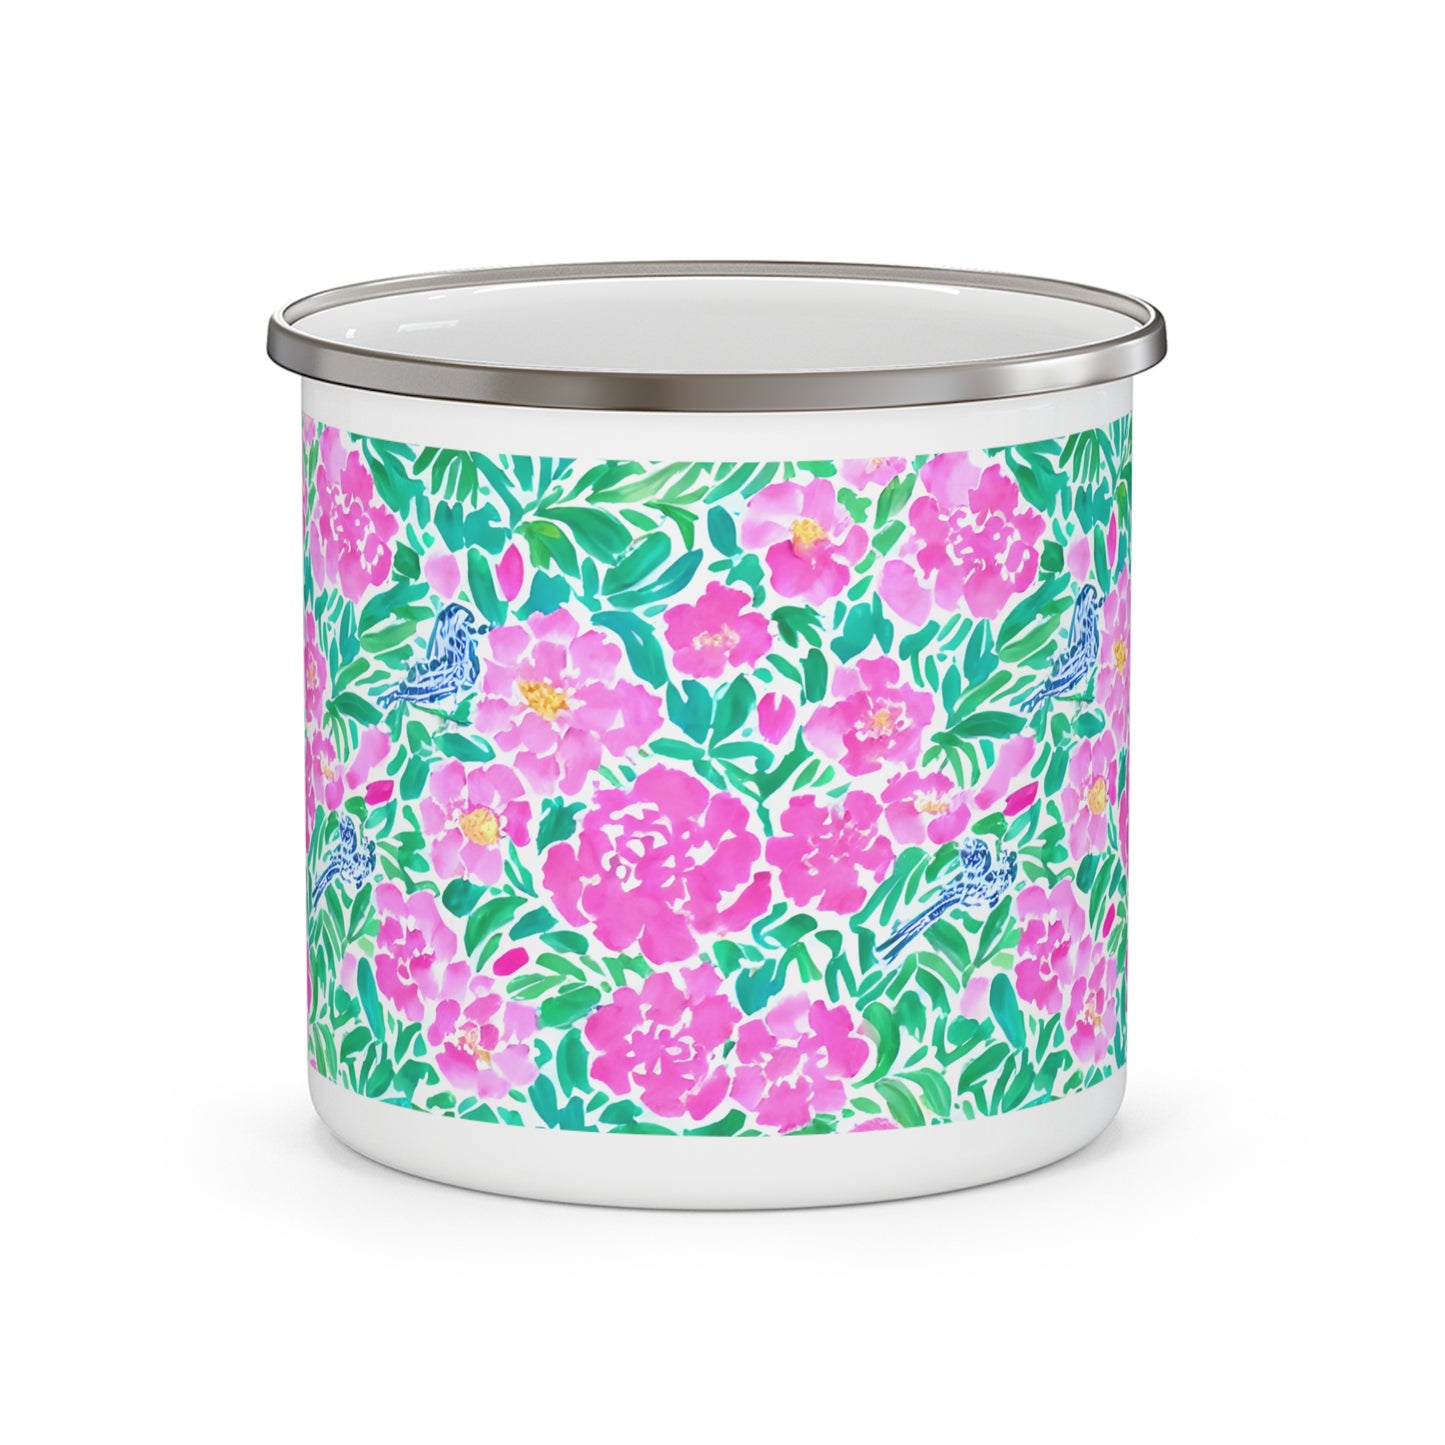 Springtime Whispers: Tiny Birds and Pink Blooms, Subtle Blue Accents, and Lush Green Leaves 12oz Enamel Camping Mug